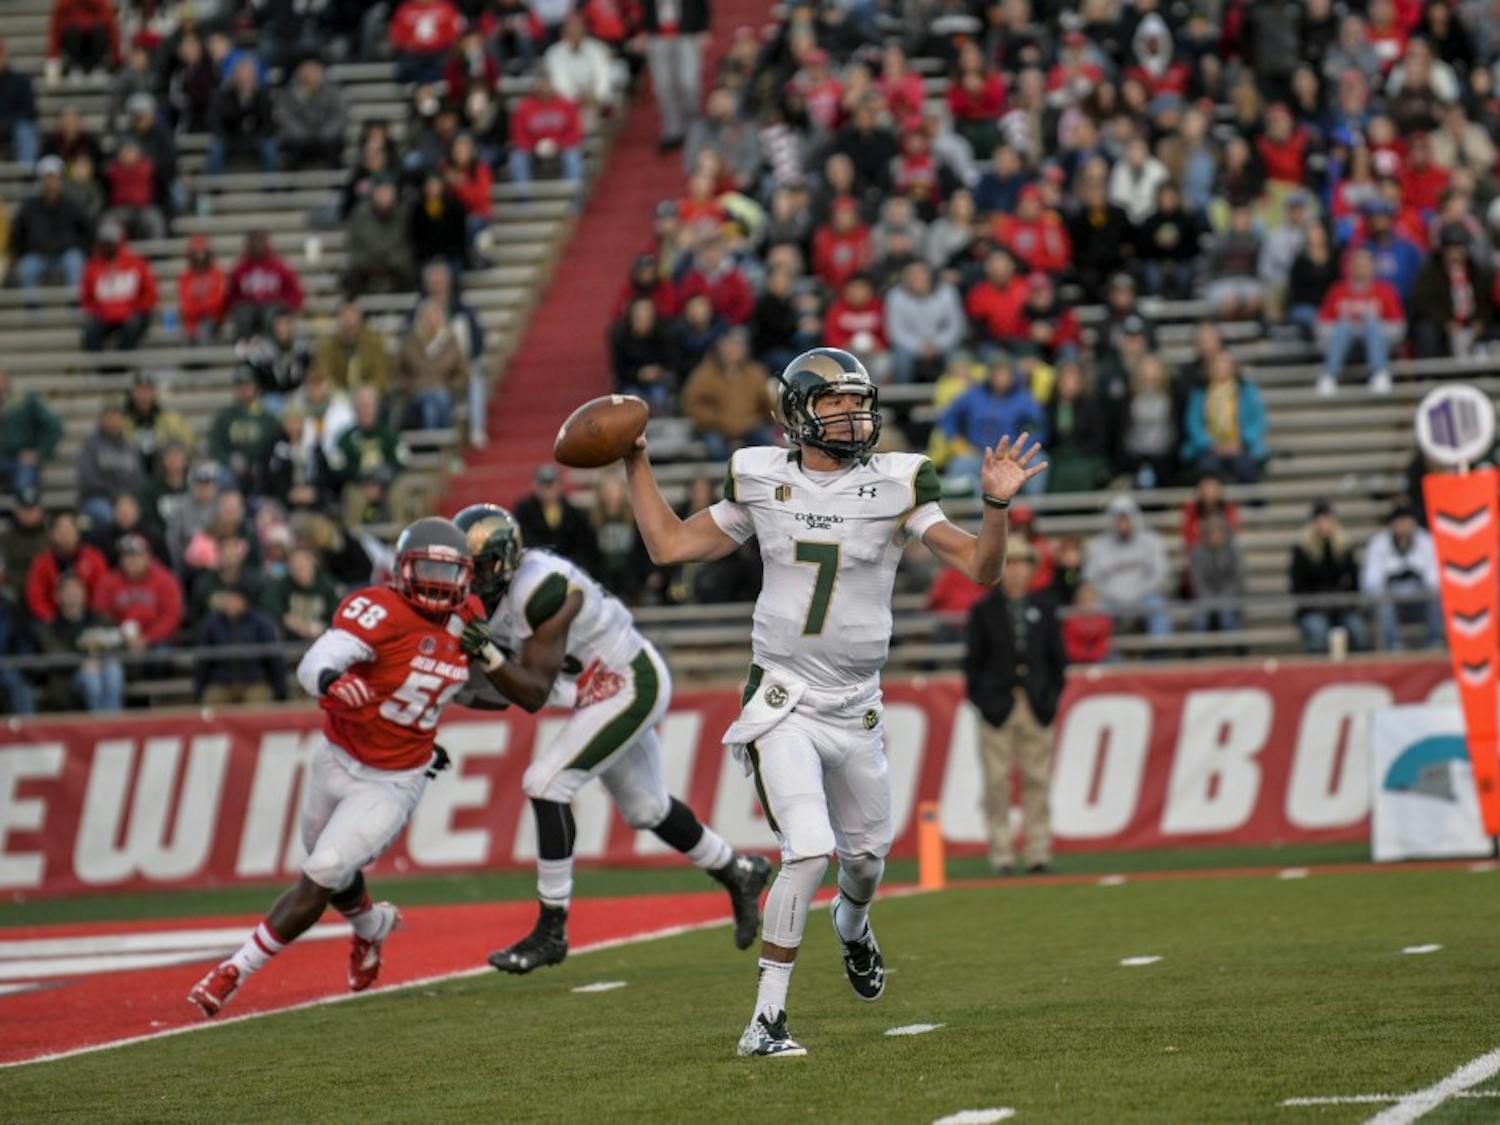 Colorado State University quarterback Nick Stevens prepares to make a pass during a UNM game on Nov. 21, 2015. UNM will be playing CSU at home on Oct. 20, 2017 at DreamStyle Stadium. 